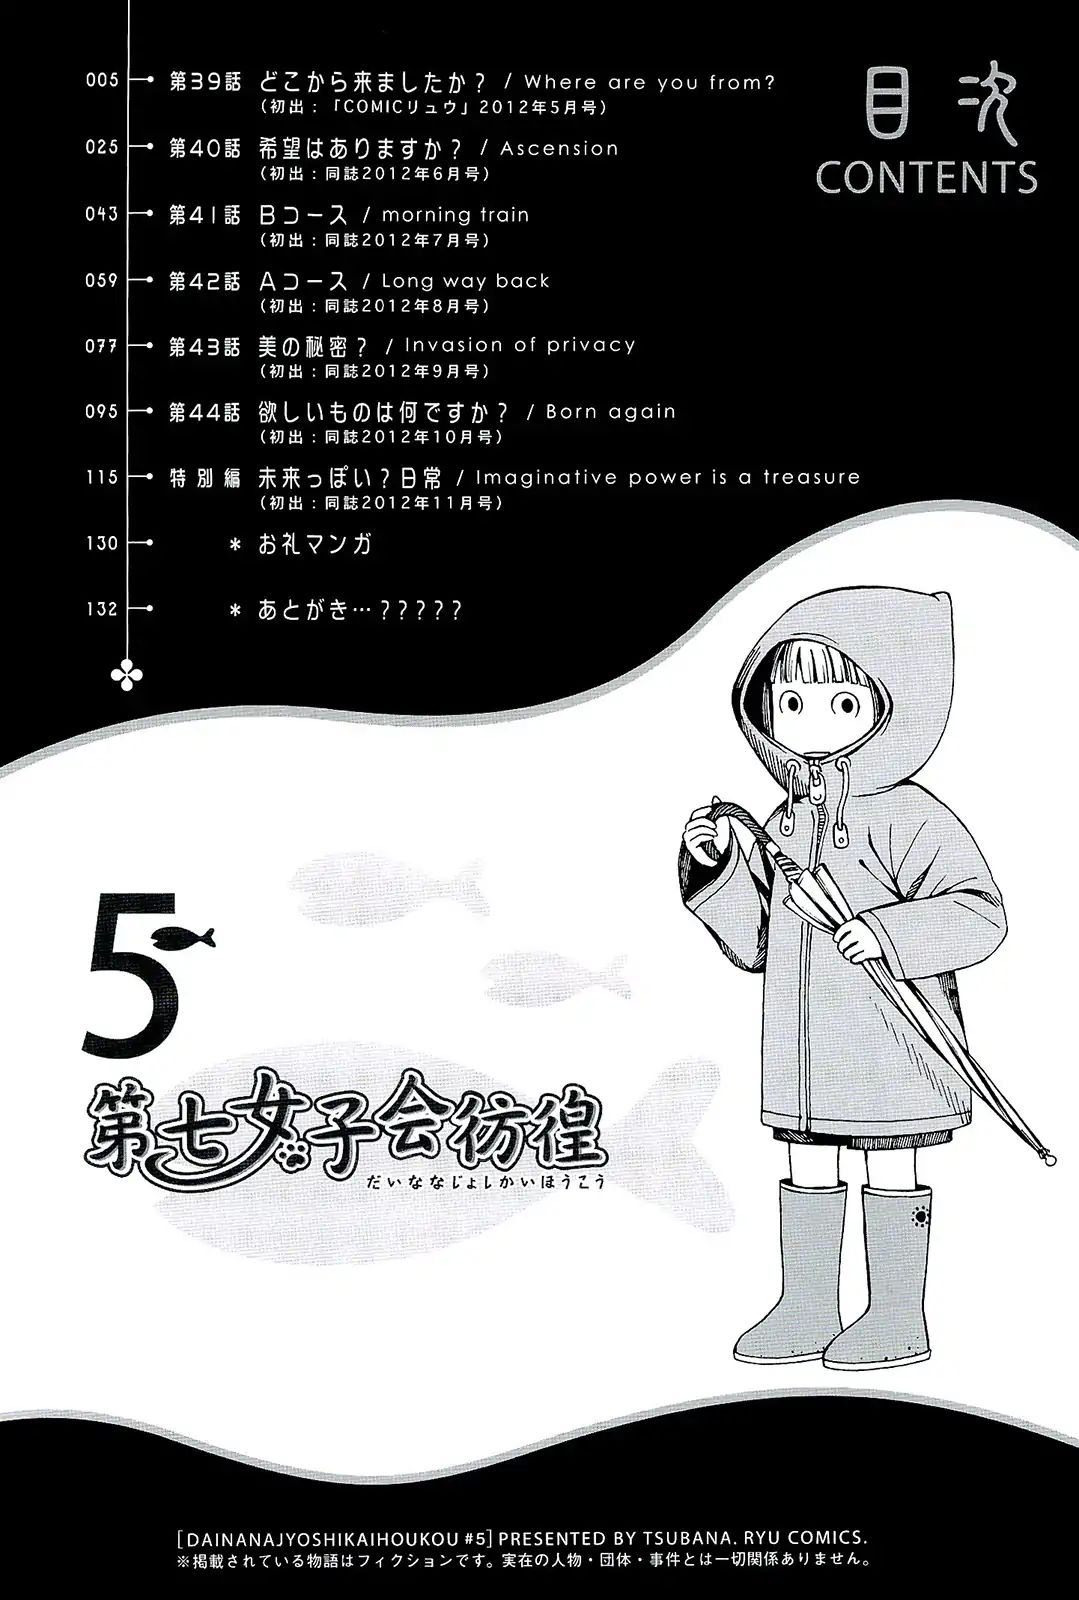 Dainana Joshikai Houkou Vol.5 Chapter 39: Where Did You Come From?/ Where Are You From? - Picture 3